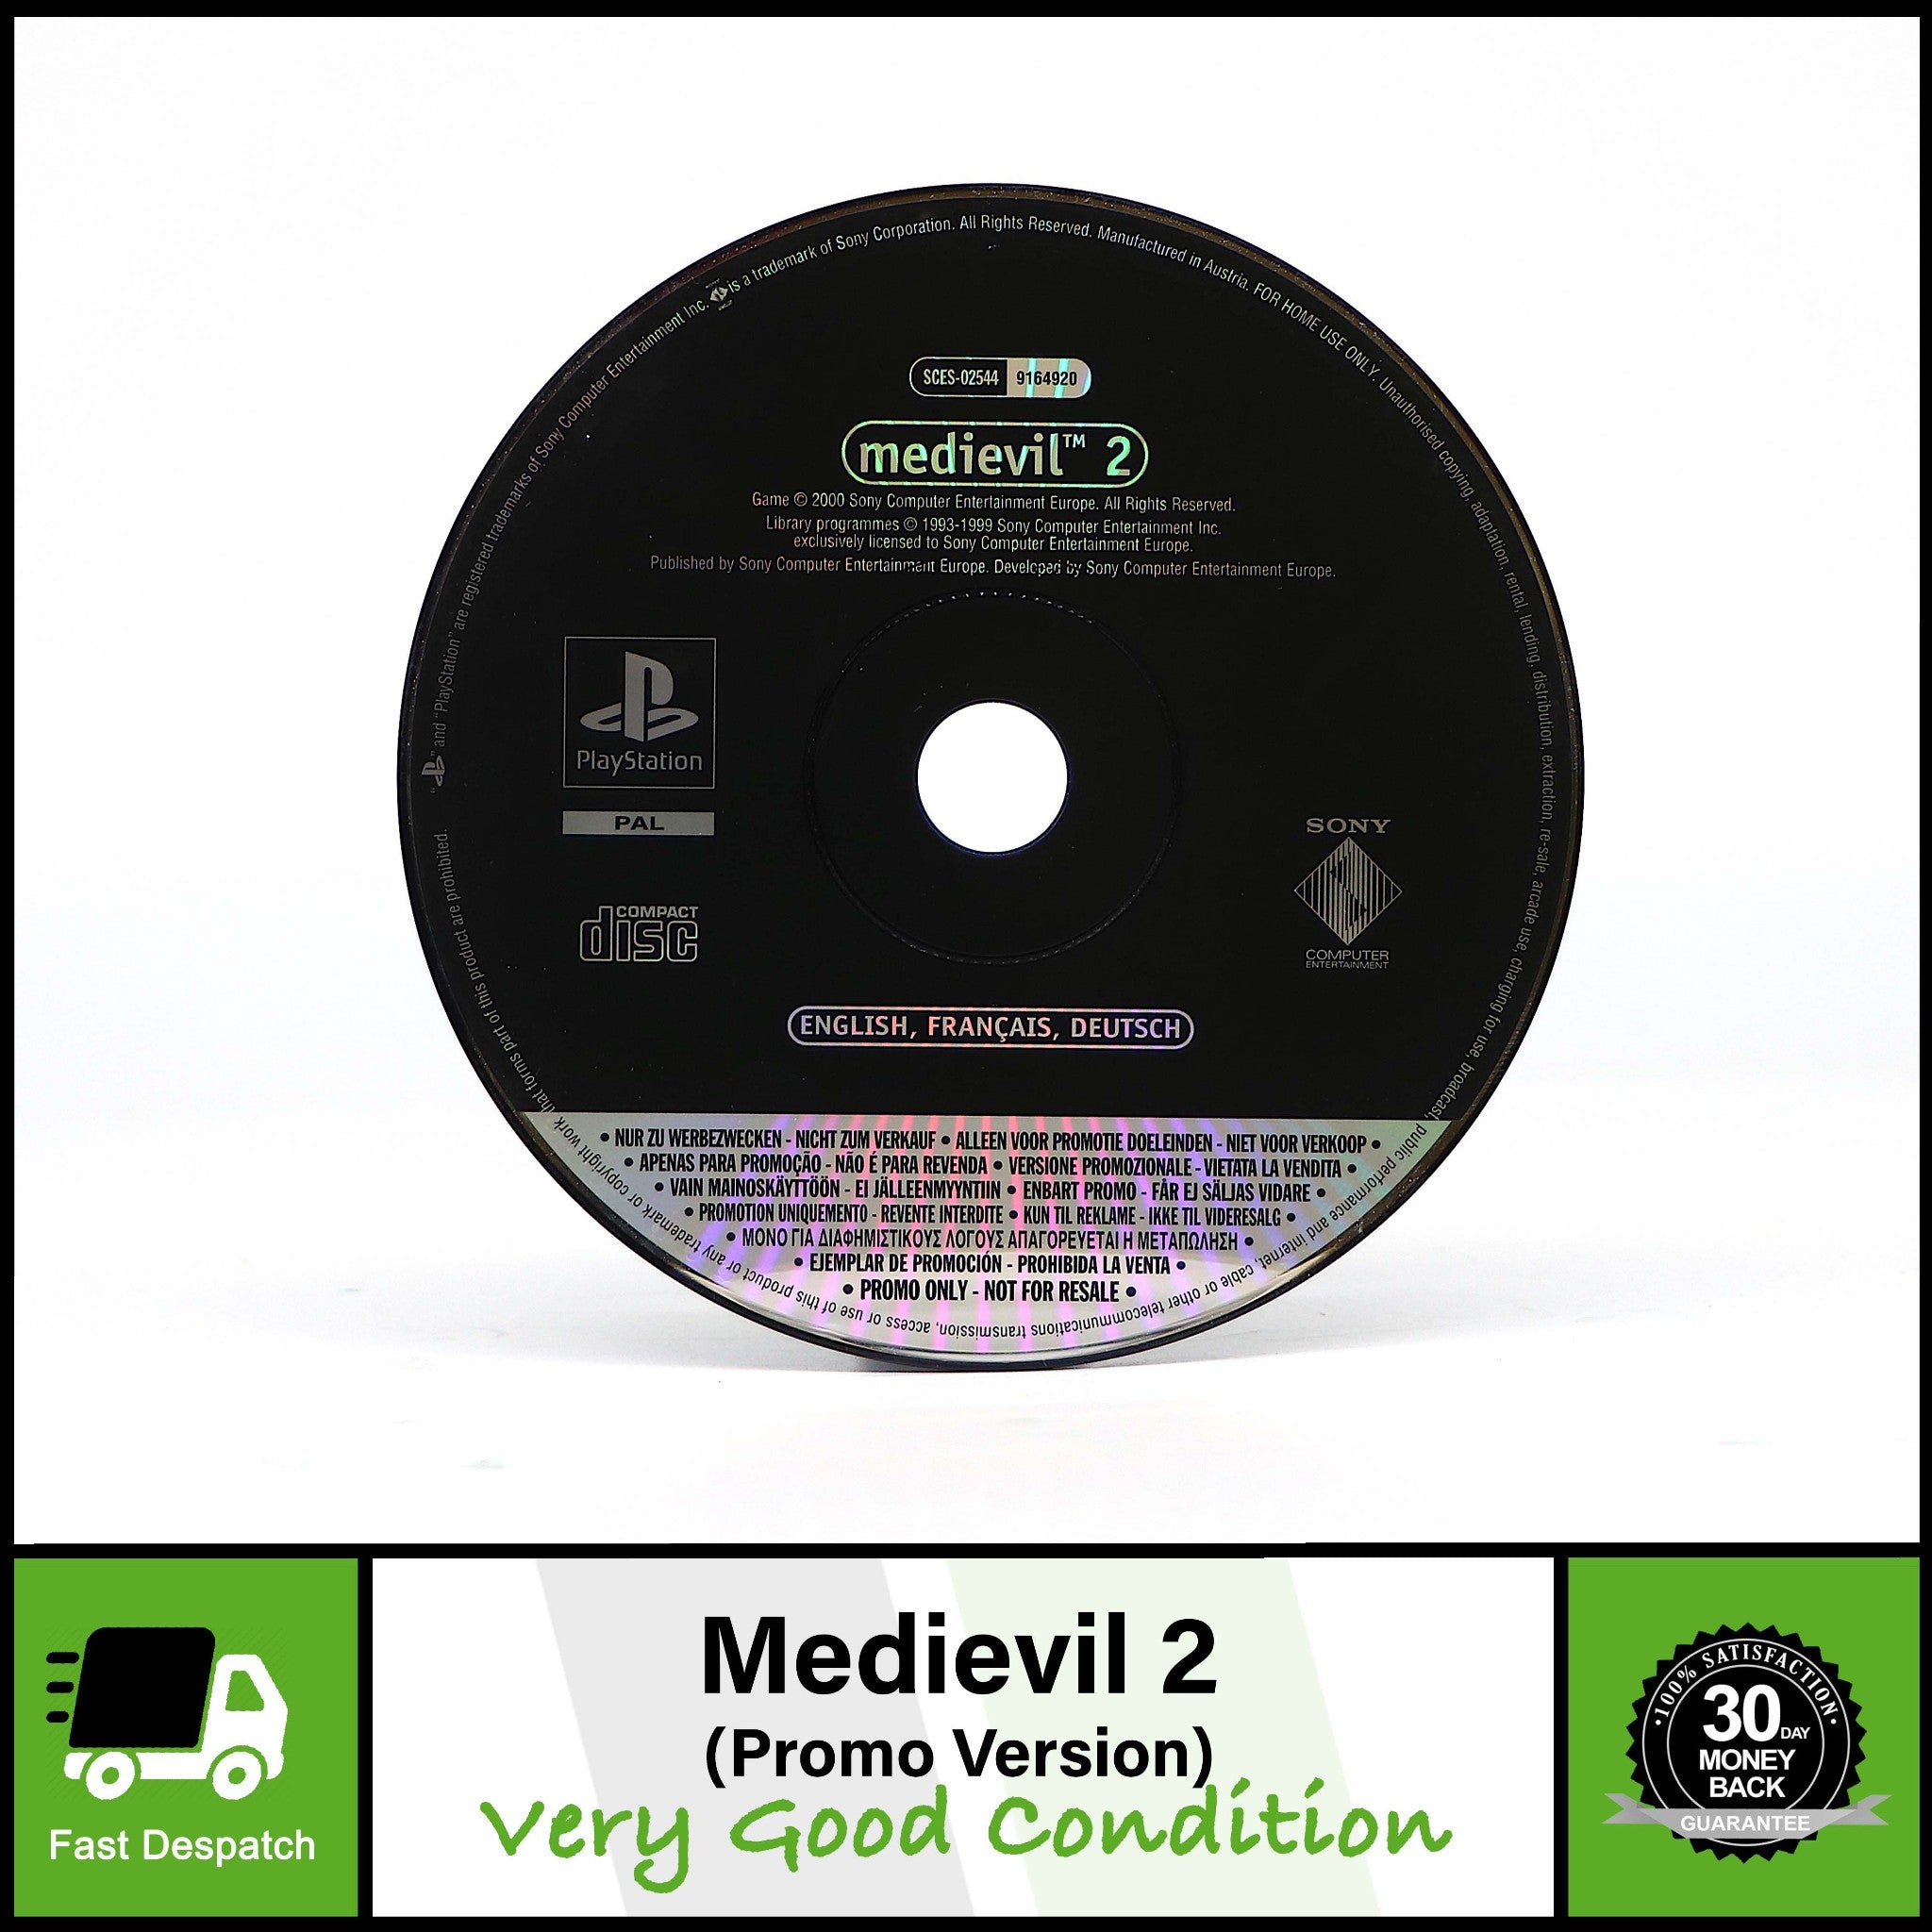 Medievil 2 | Sony PS1 Game | Promo Version | Very Good Condition!